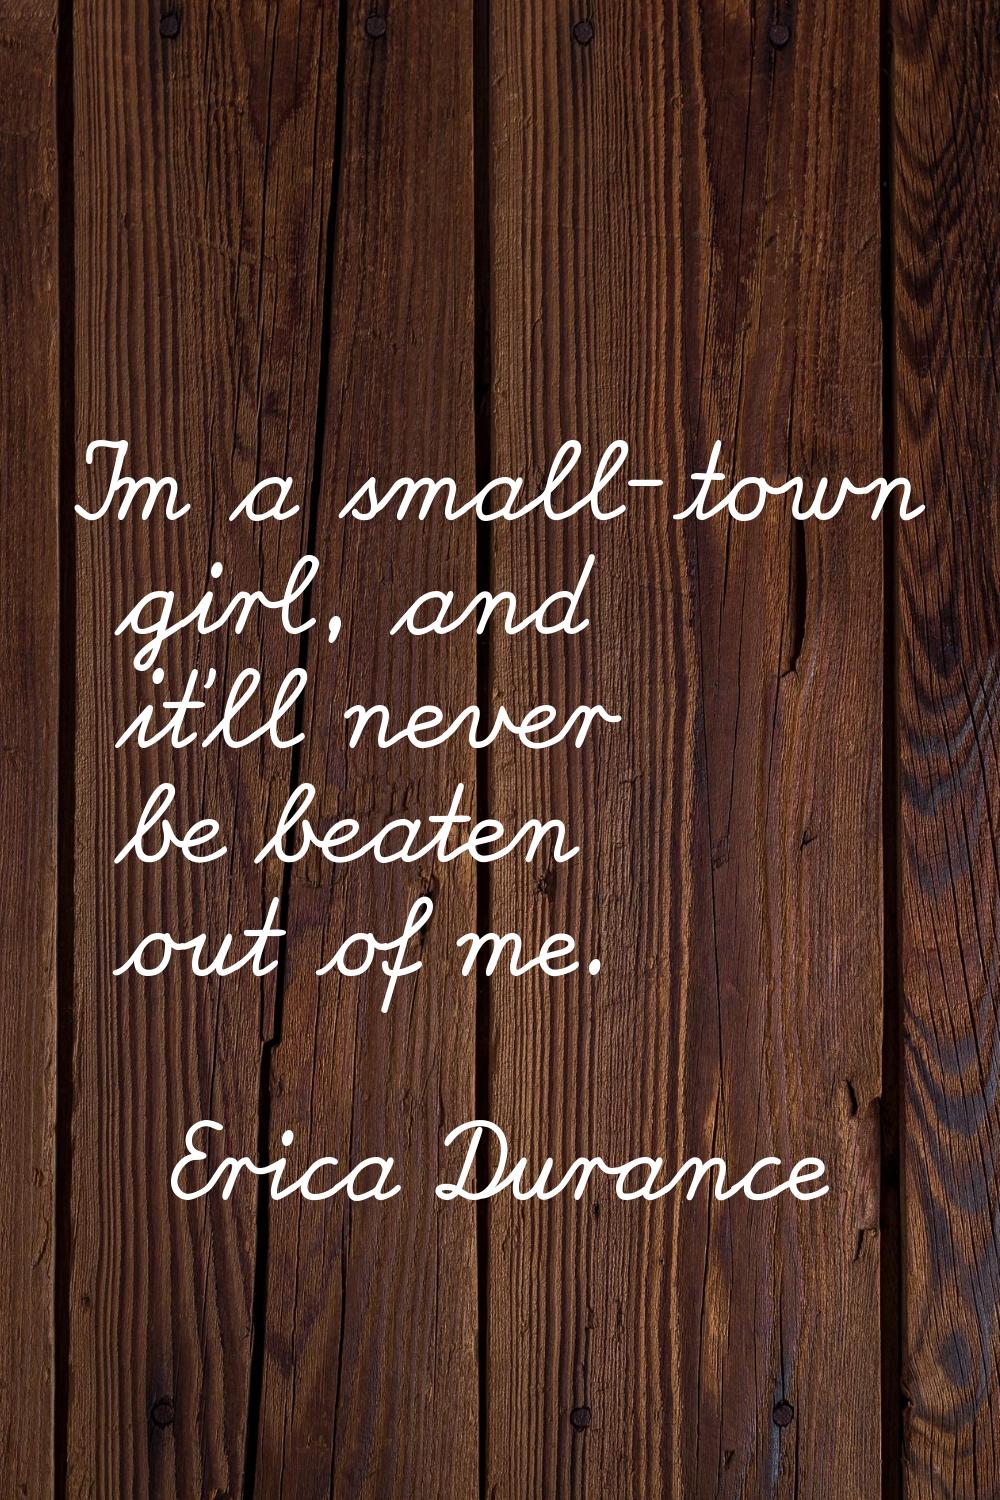 I'm a small-town girl, and it'll never be beaten out of me.